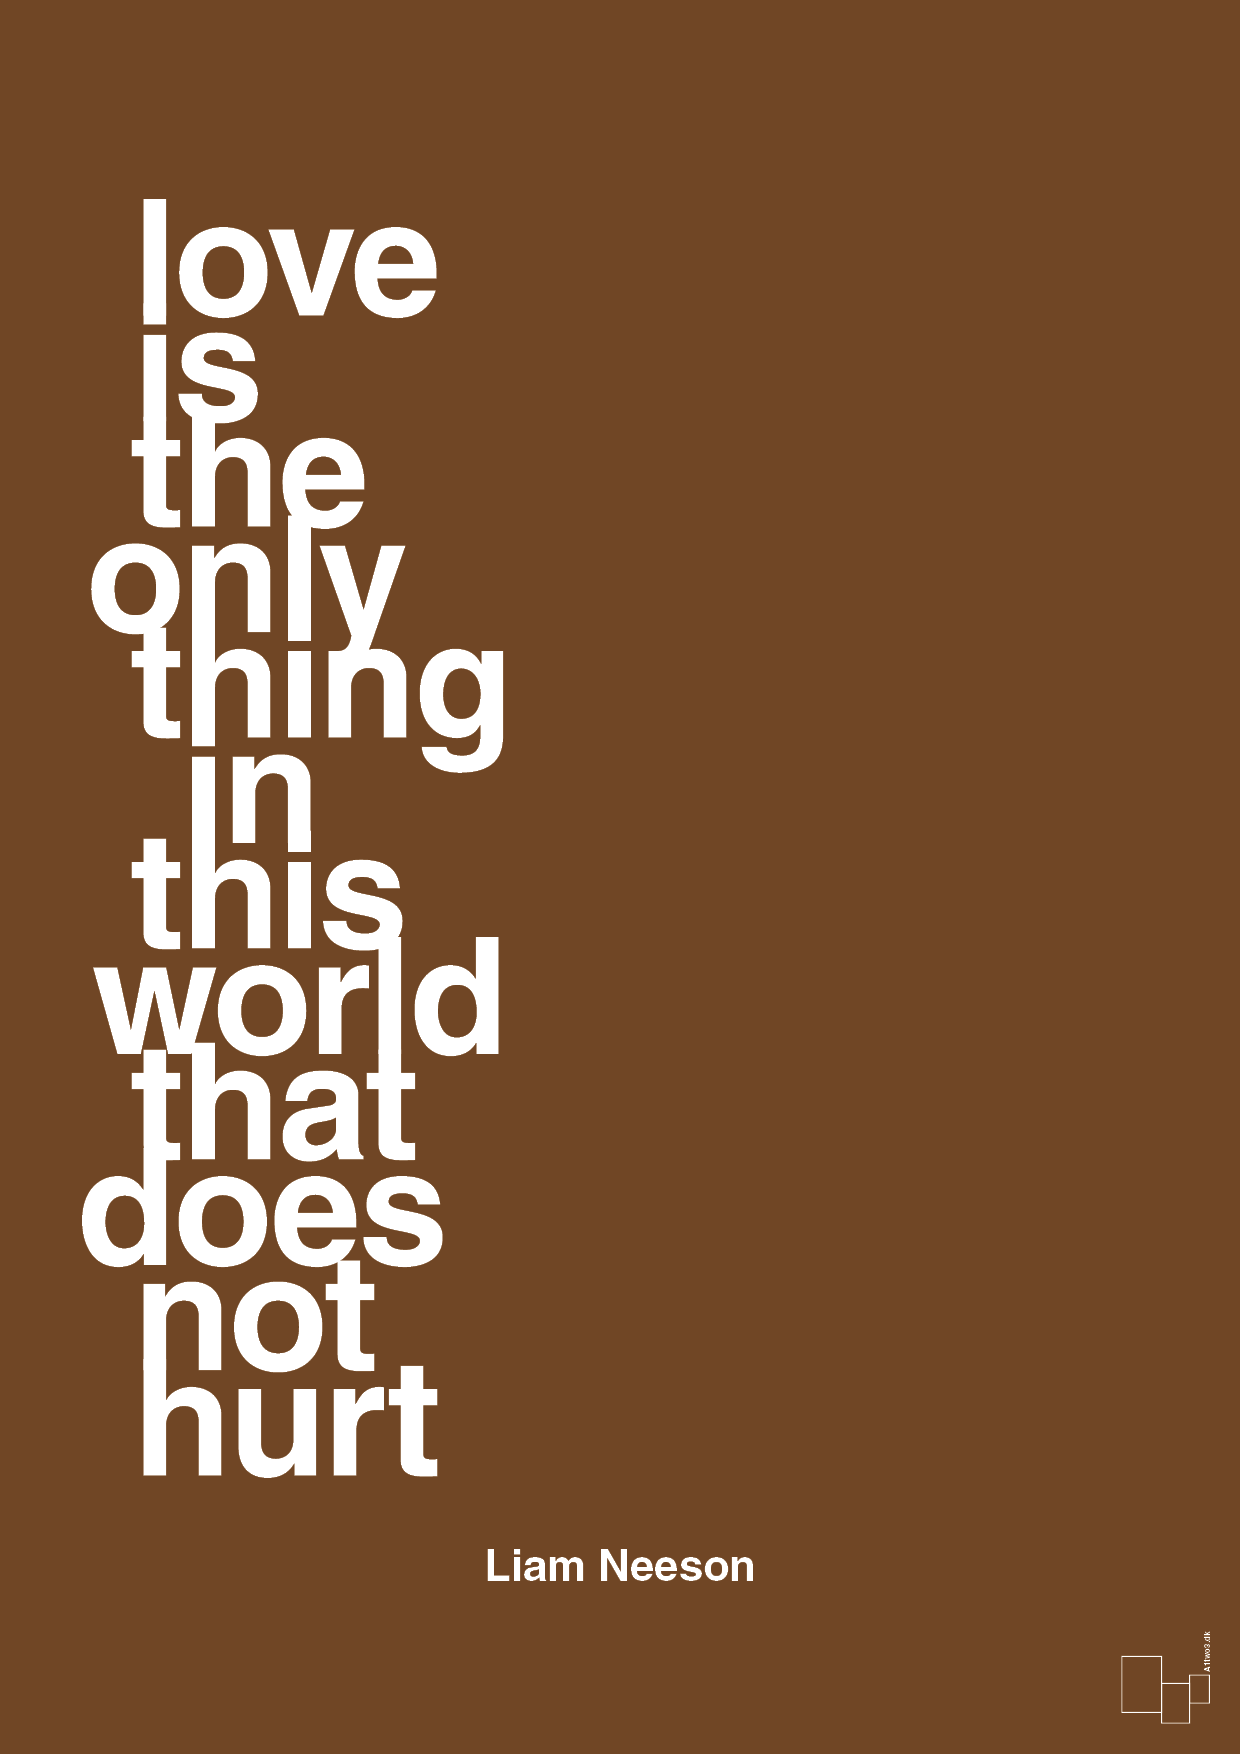 love is the only thing in this world that does not hurt - Plakat med Citater i Dark Brown